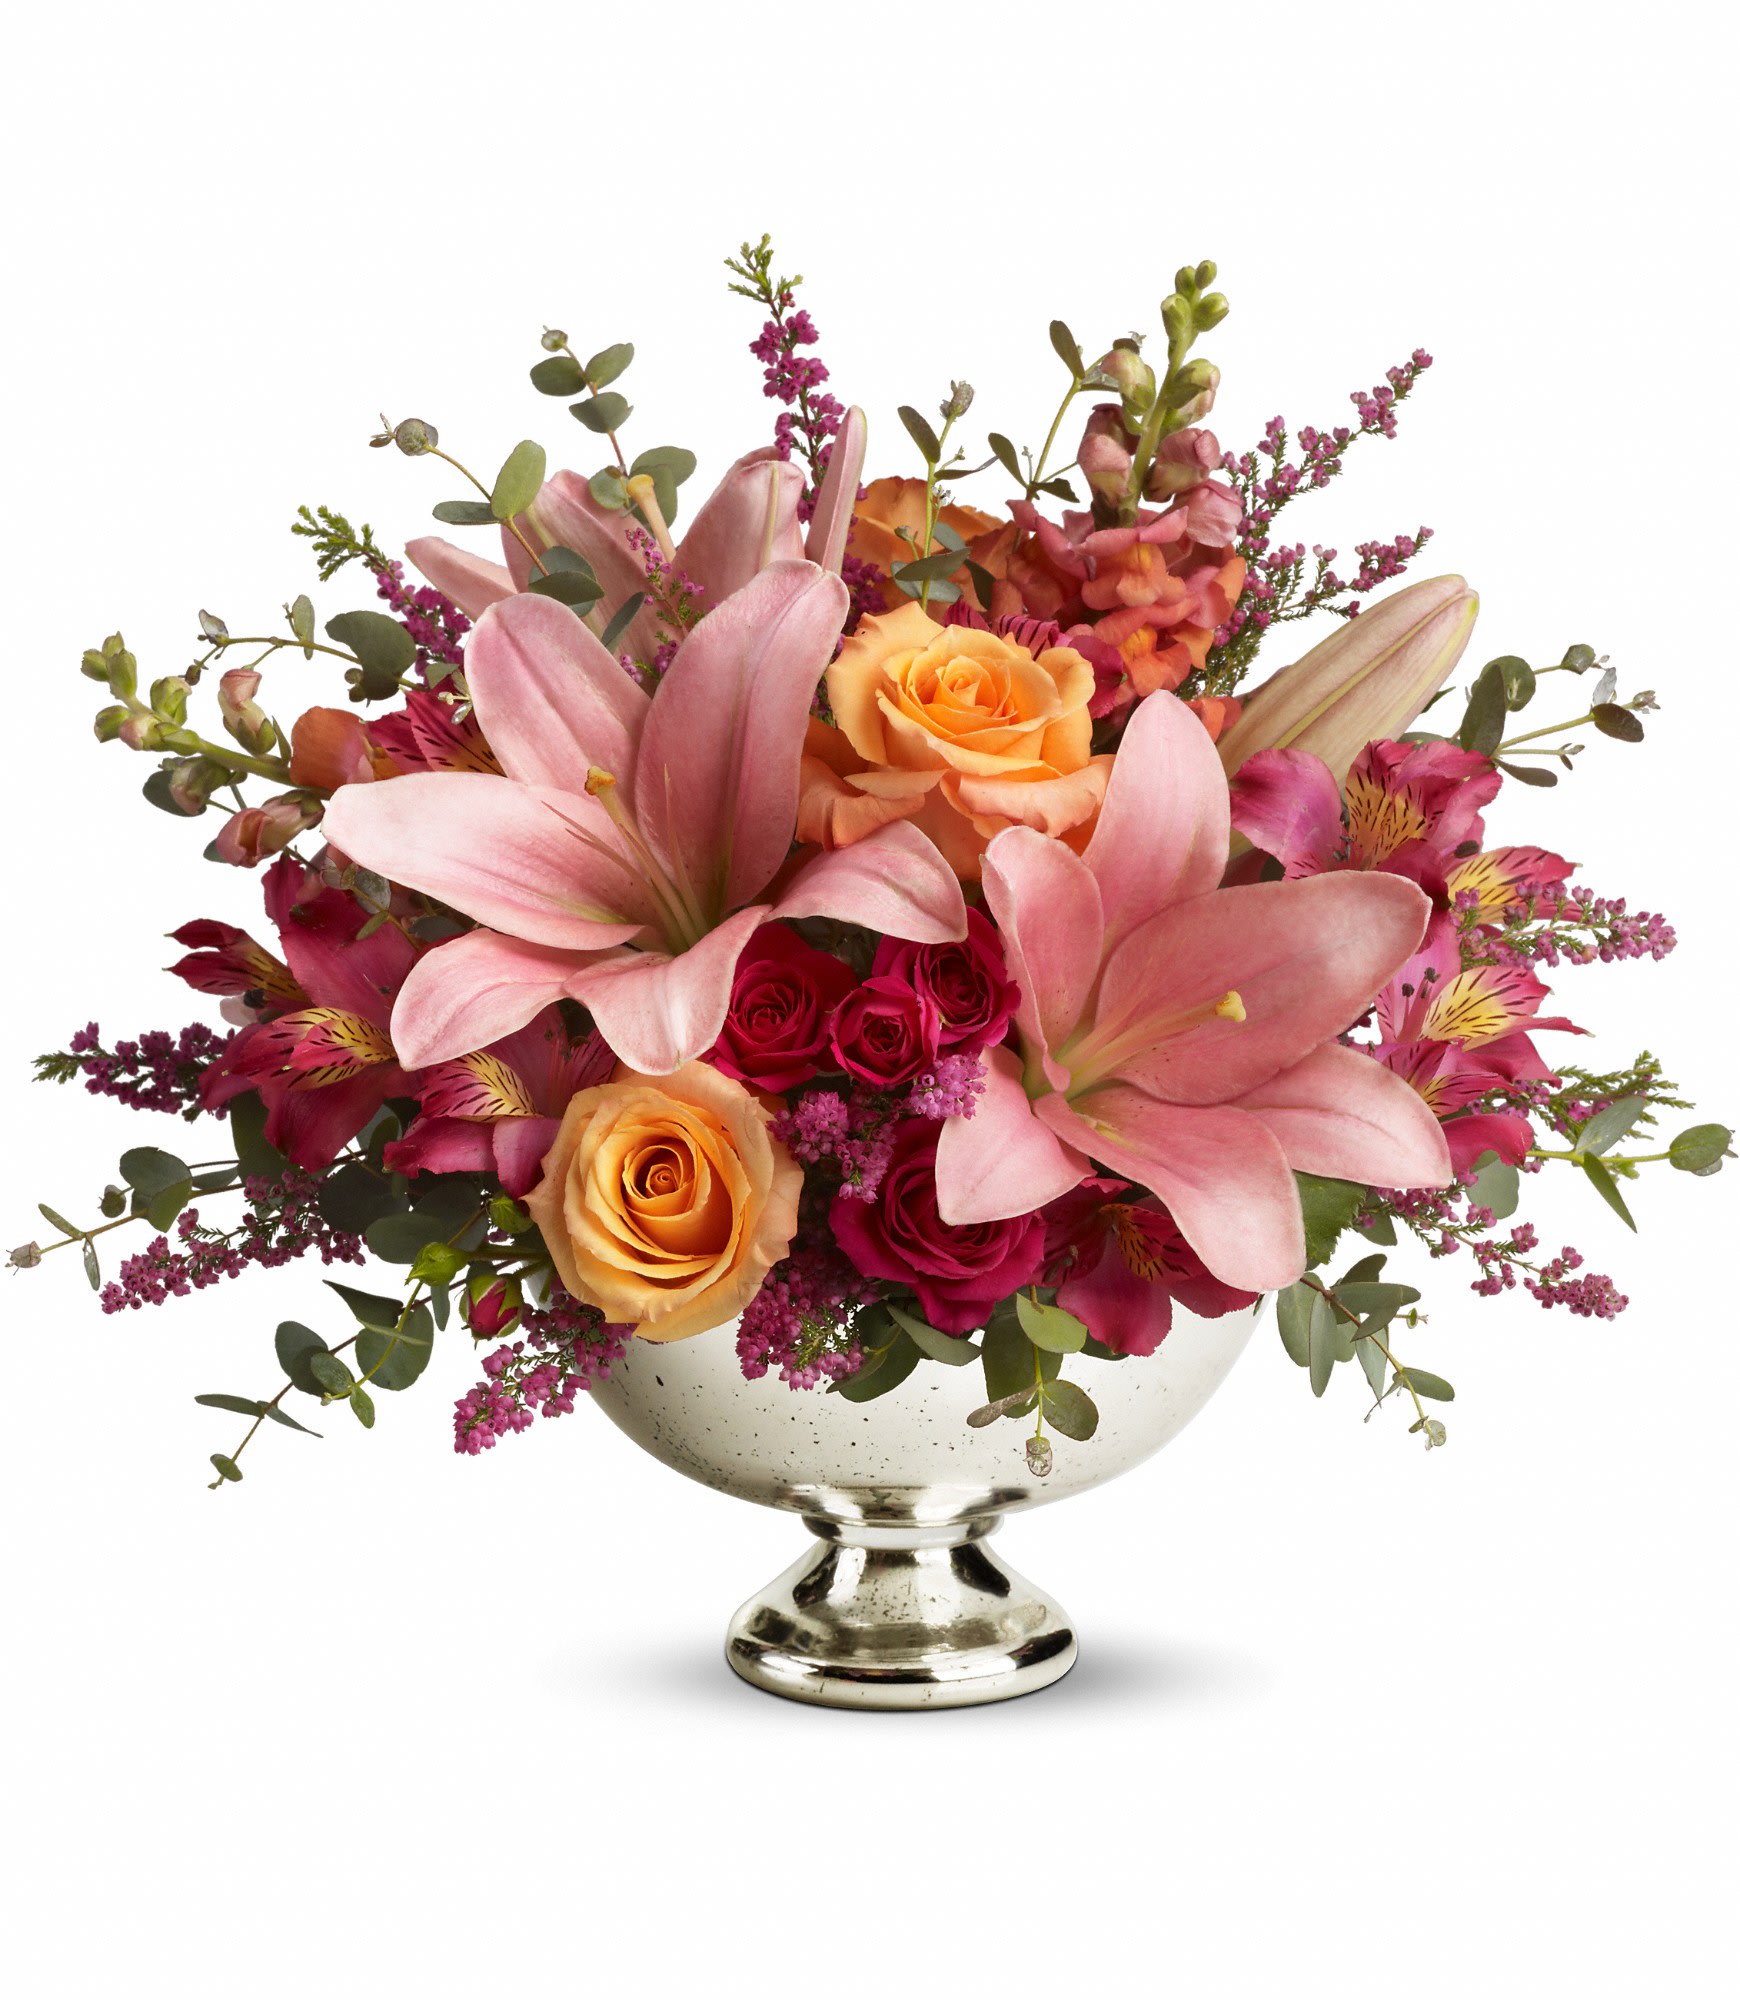 Beauty in Bloom - Bowl someone over with this bounty of beautiful blossoms. Stunning. Spectacular. Stylish. Perfect for any occasion at home or anywhere, there's always room for a bouquet like this! 